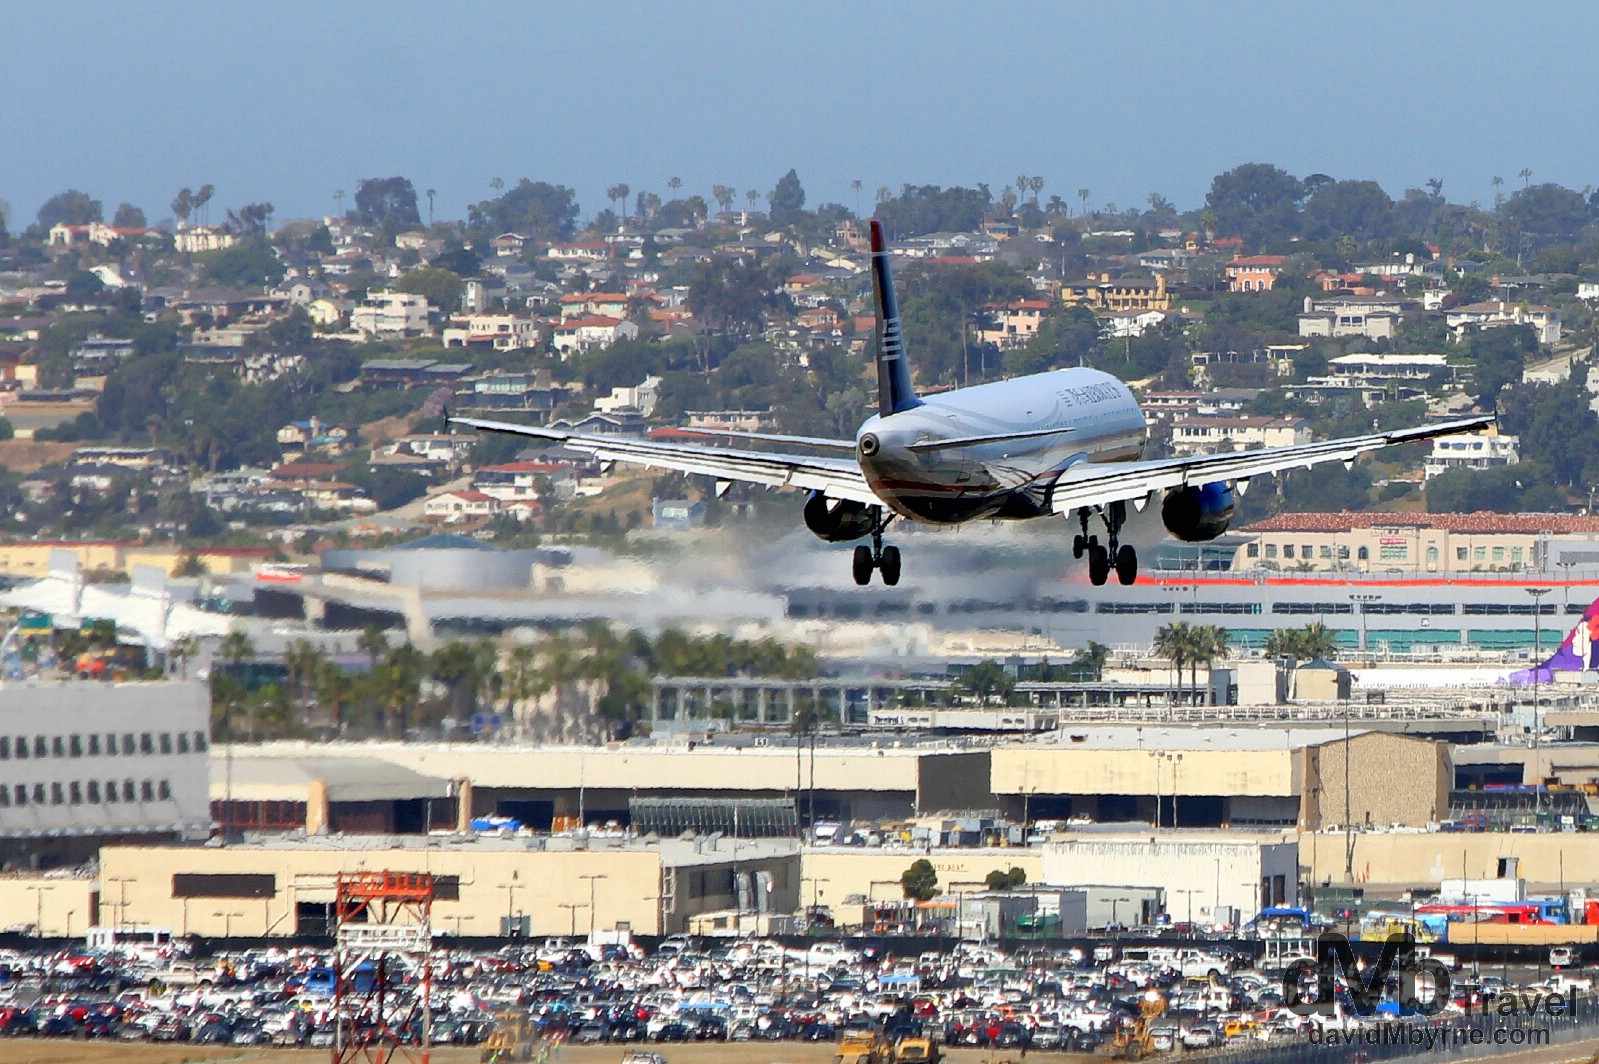 A plane coming in to land at San Diego International Airport as seen from Laurel Street. San Diego, California, USA. April 17th 2013.